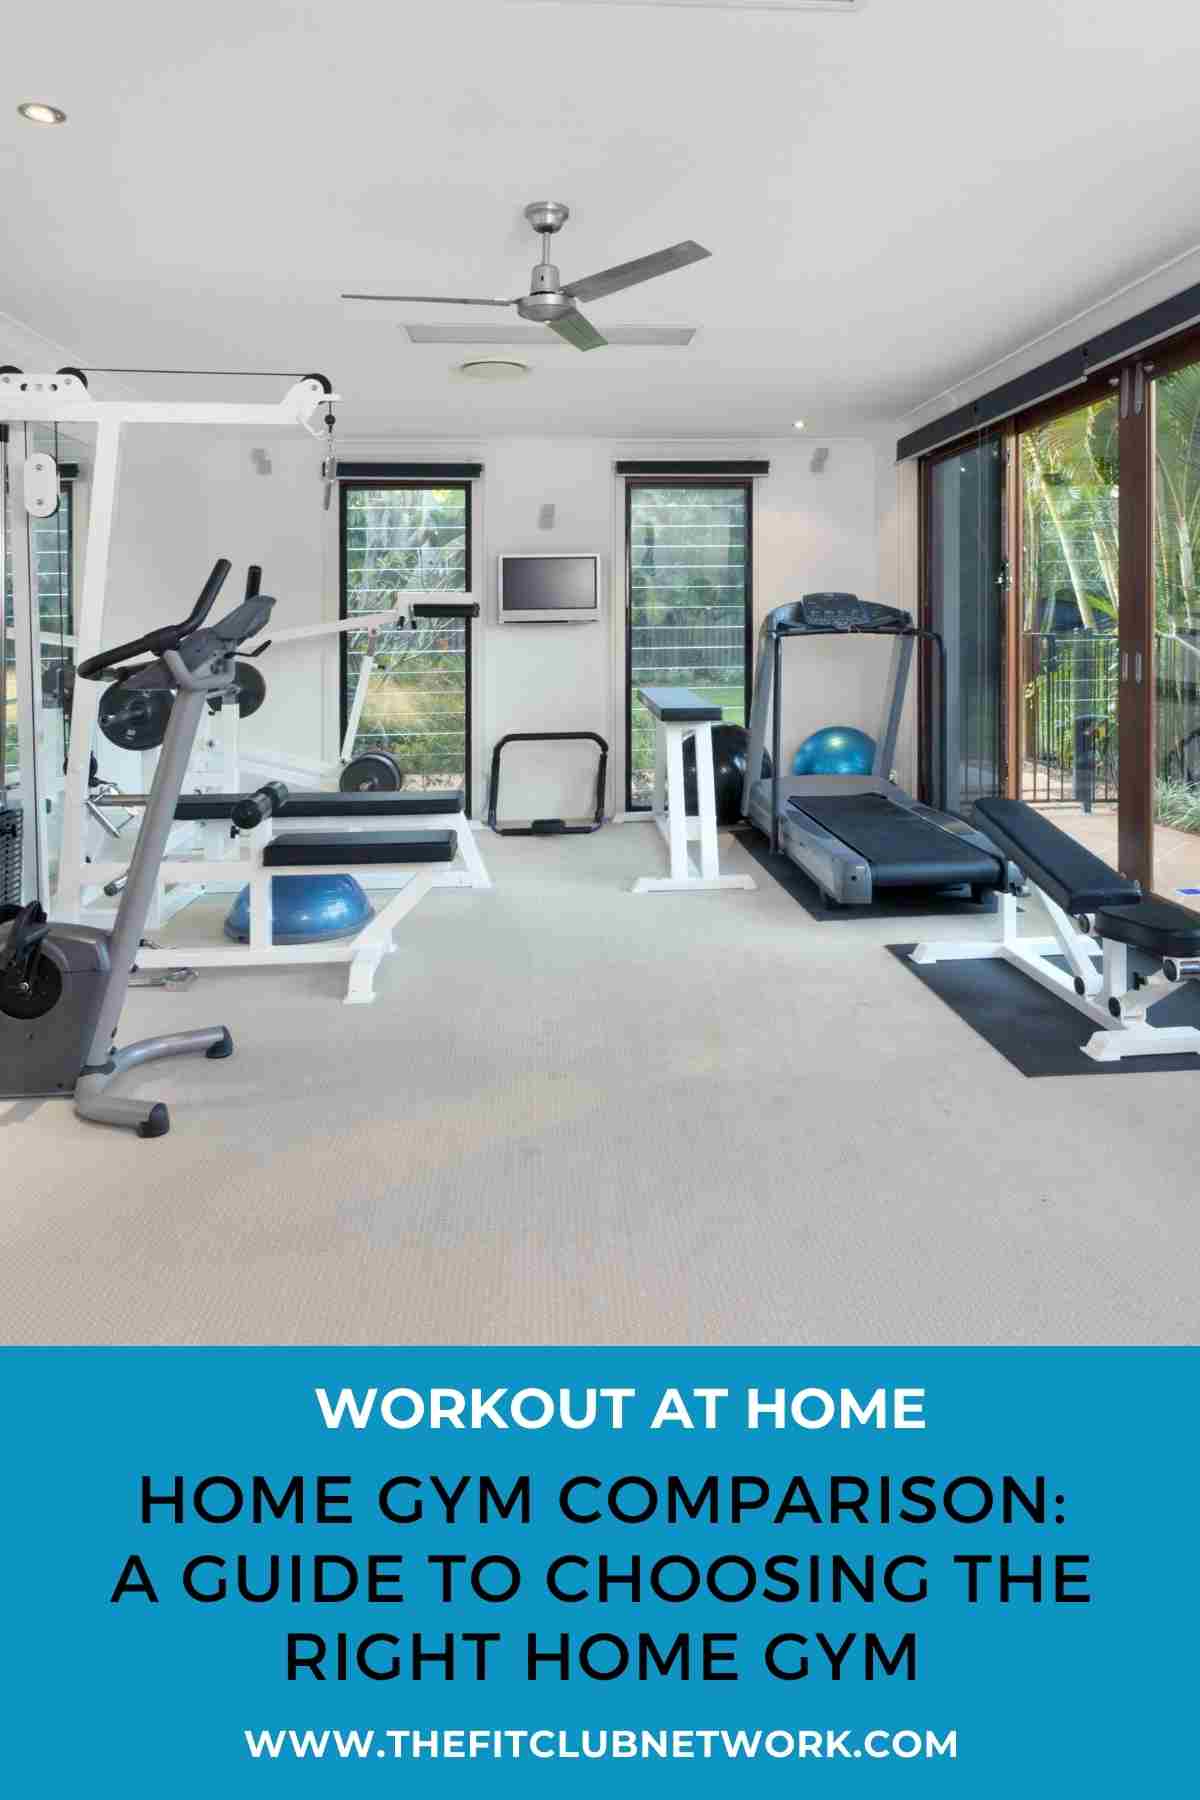 Home Gym Comparison: A Guide to Choosing the Right Home Gym | THEFITCLUBNETWORK.COM